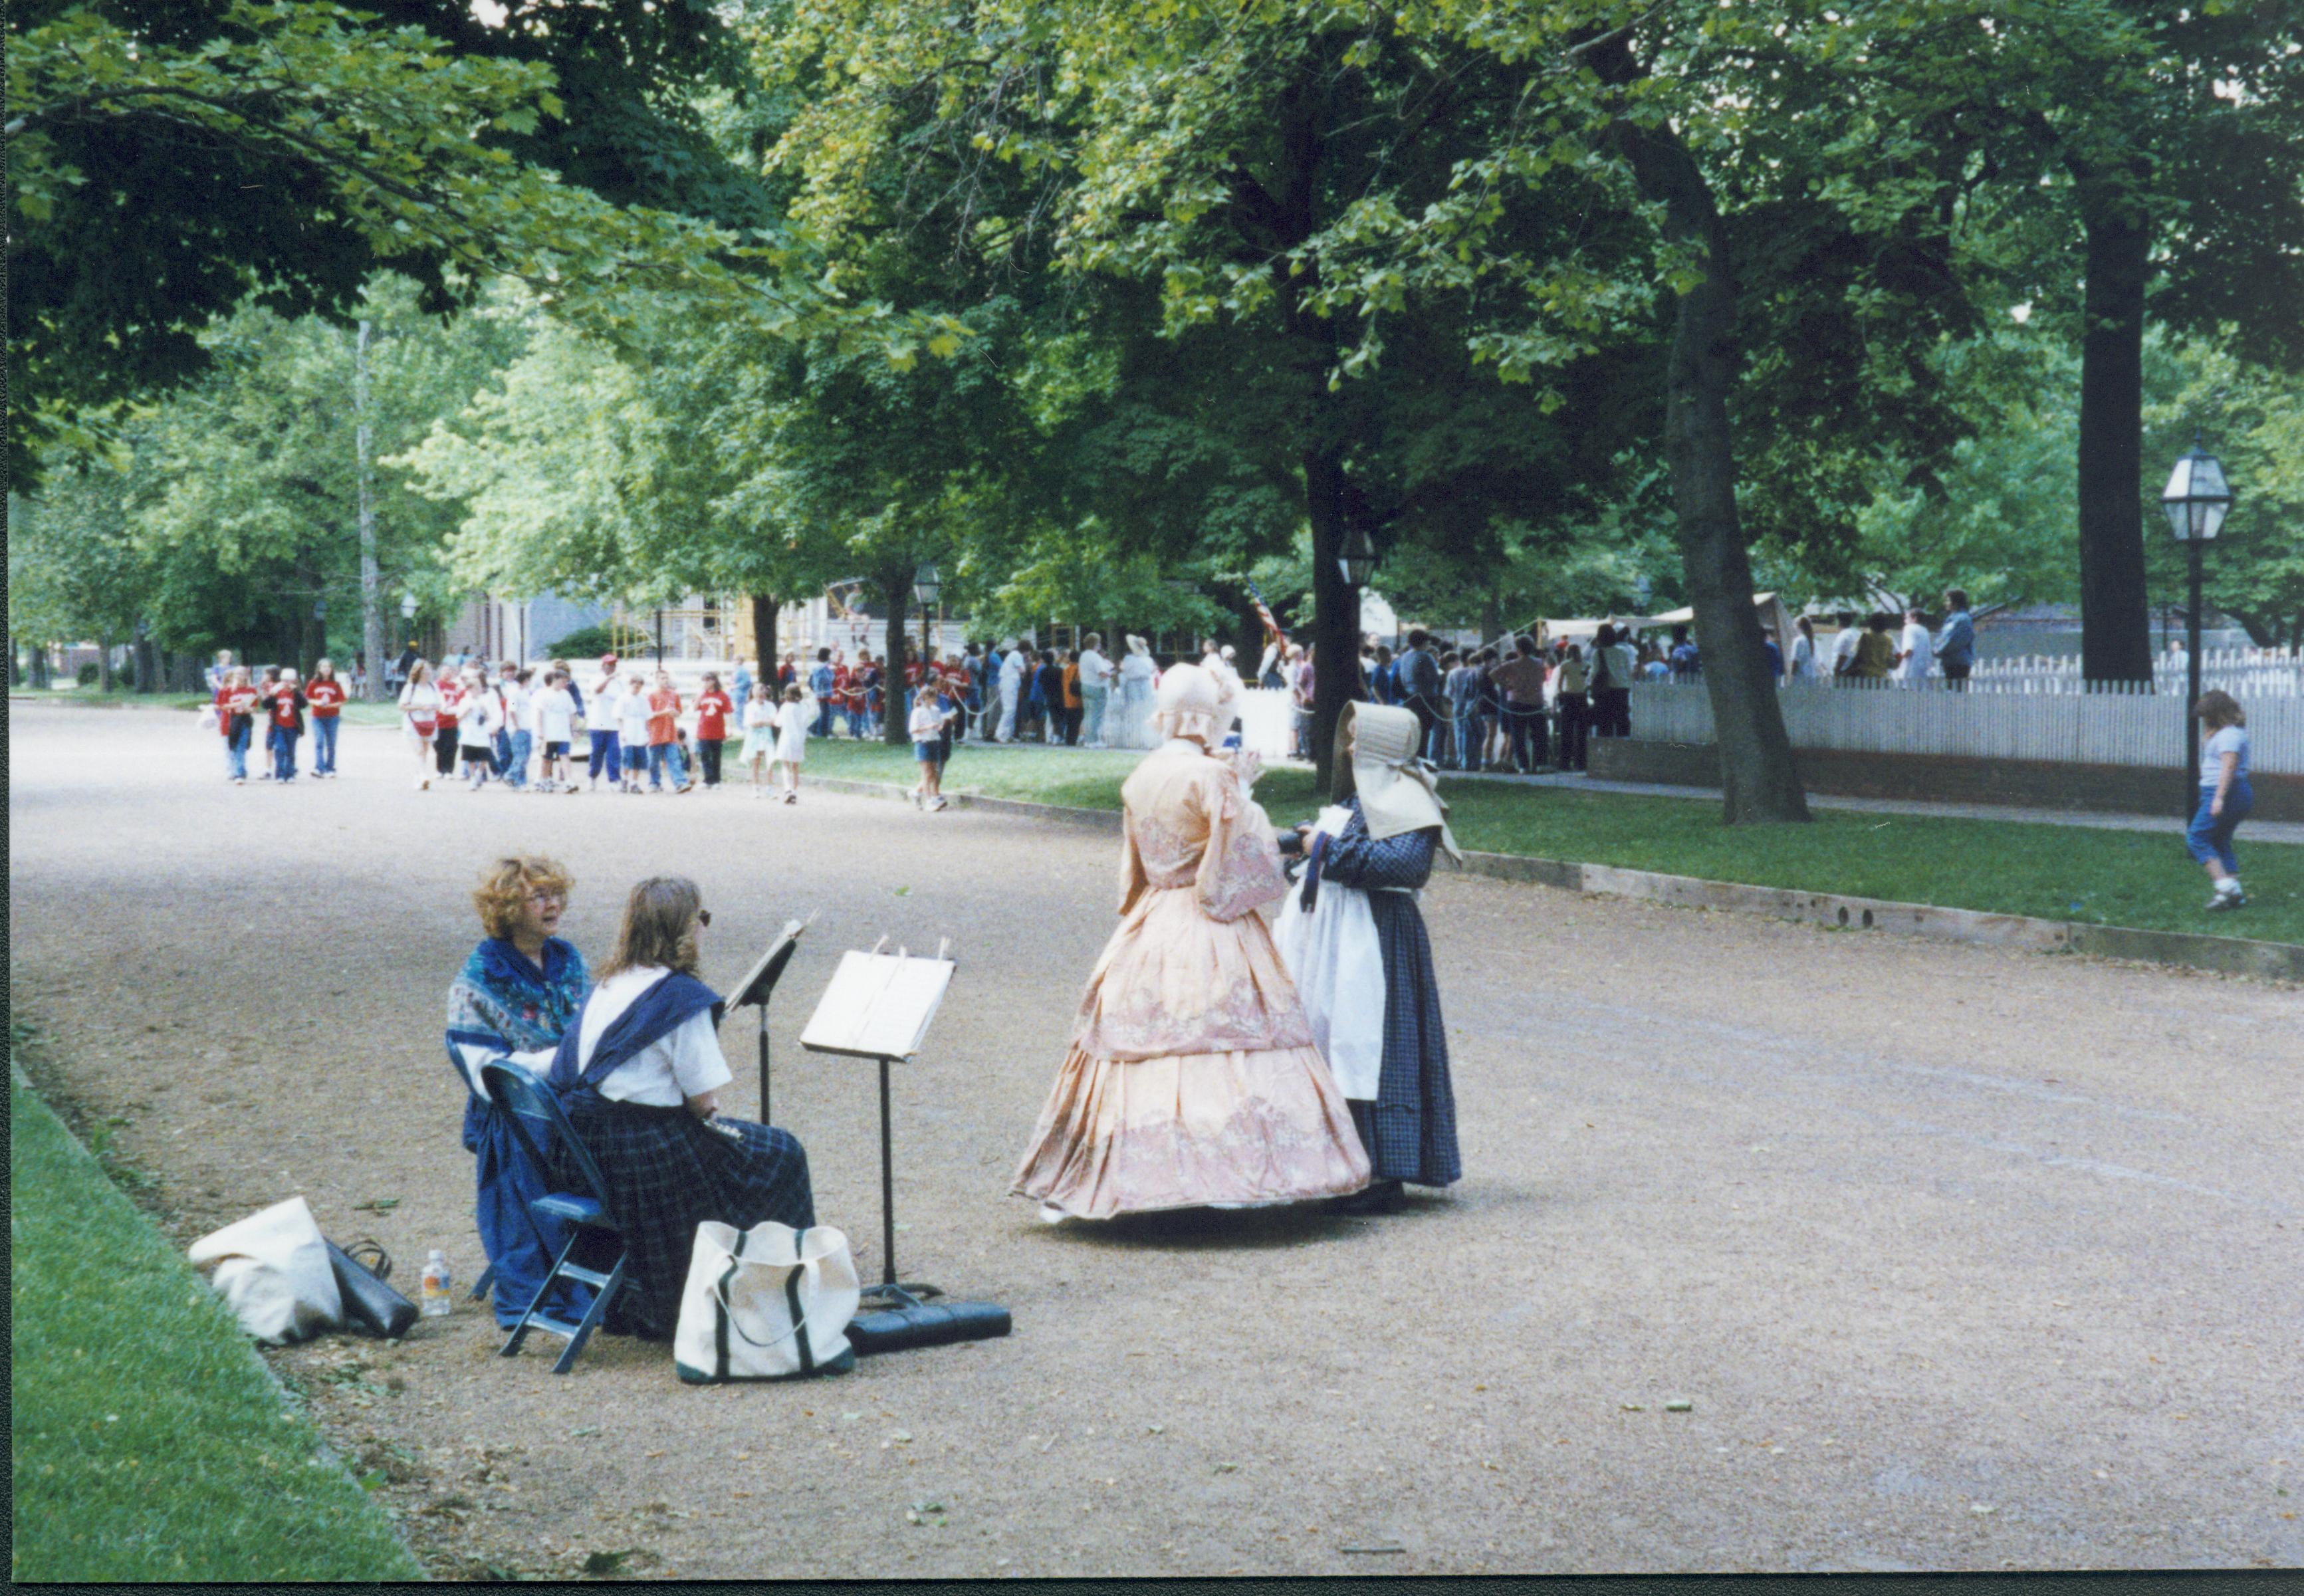 Iles School Living History program - Two musicians sitting behind music stands in 8th Street while teachers in period dress discuss event.  School groups seen throughout park in background. Scaffolding for Corneau House in far background center. Looking Southwest from East side of 8th Street Iles School, living history, musicians, teachers, school groups, 8th Street, Corneau